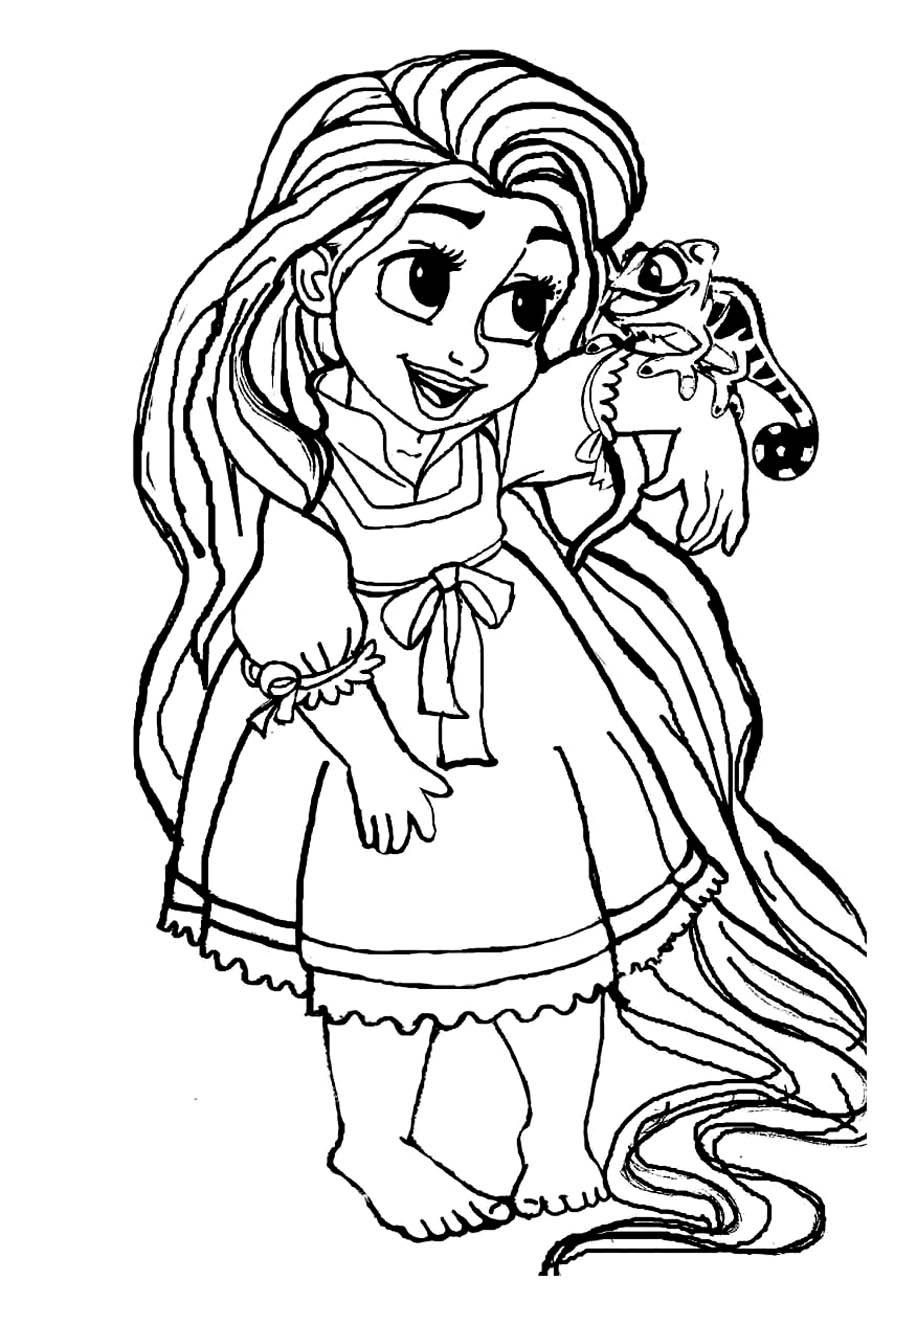 Tangled to print for free - Tangled Kids Coloring Pages